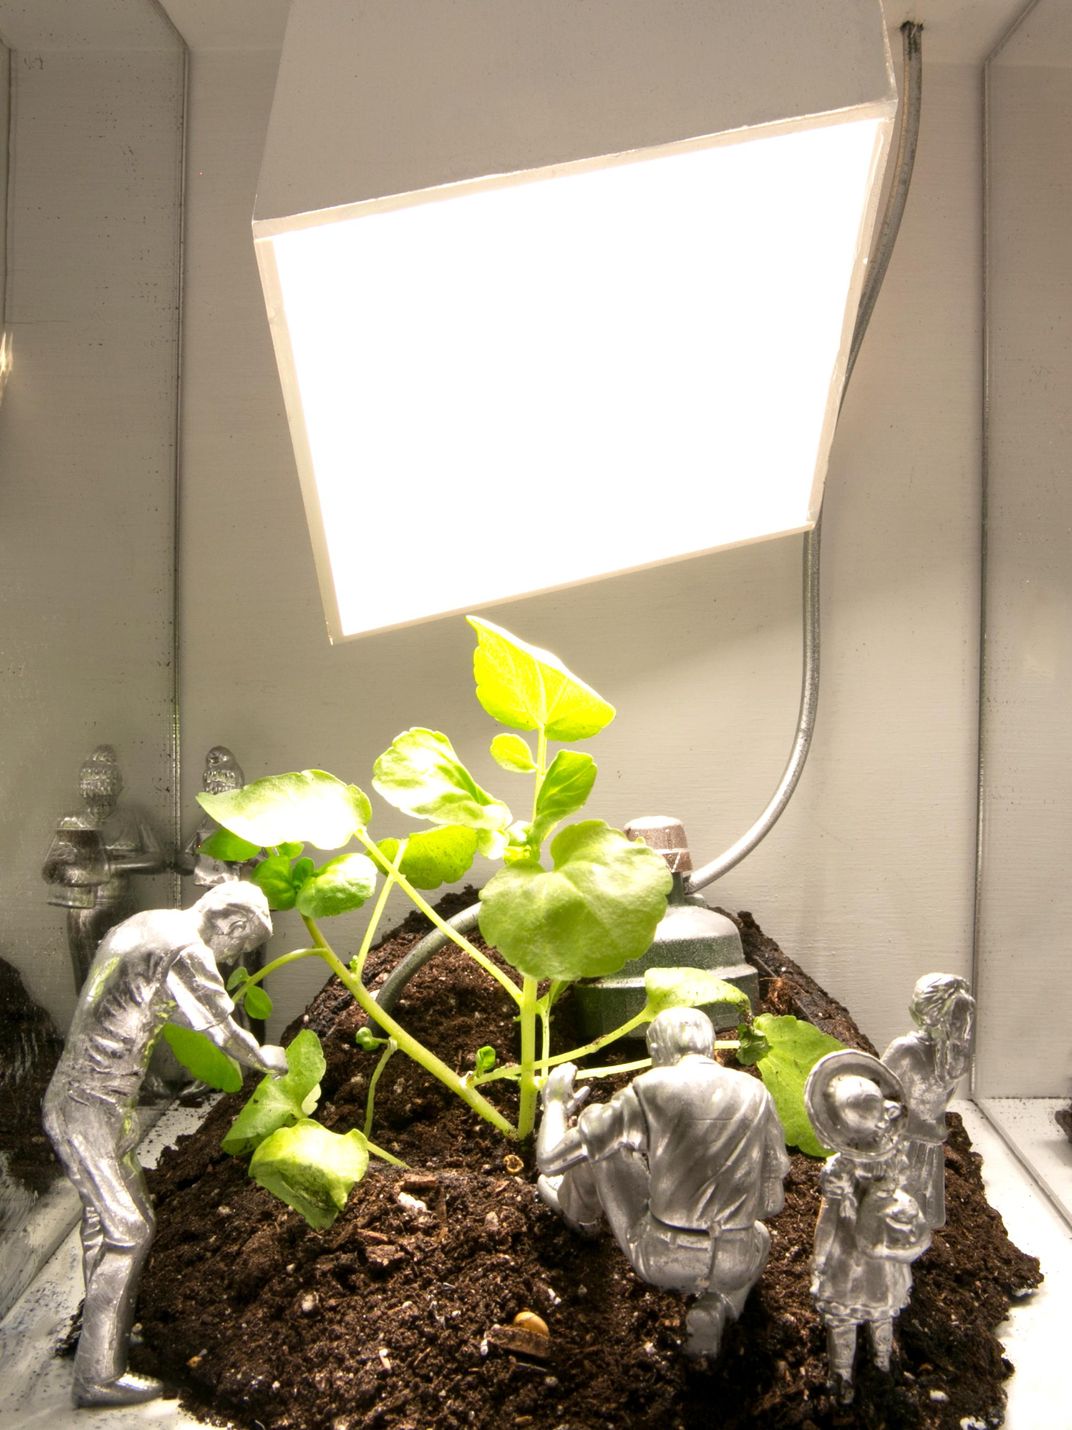 These Glowing Plants Could One Day Light Our Homes